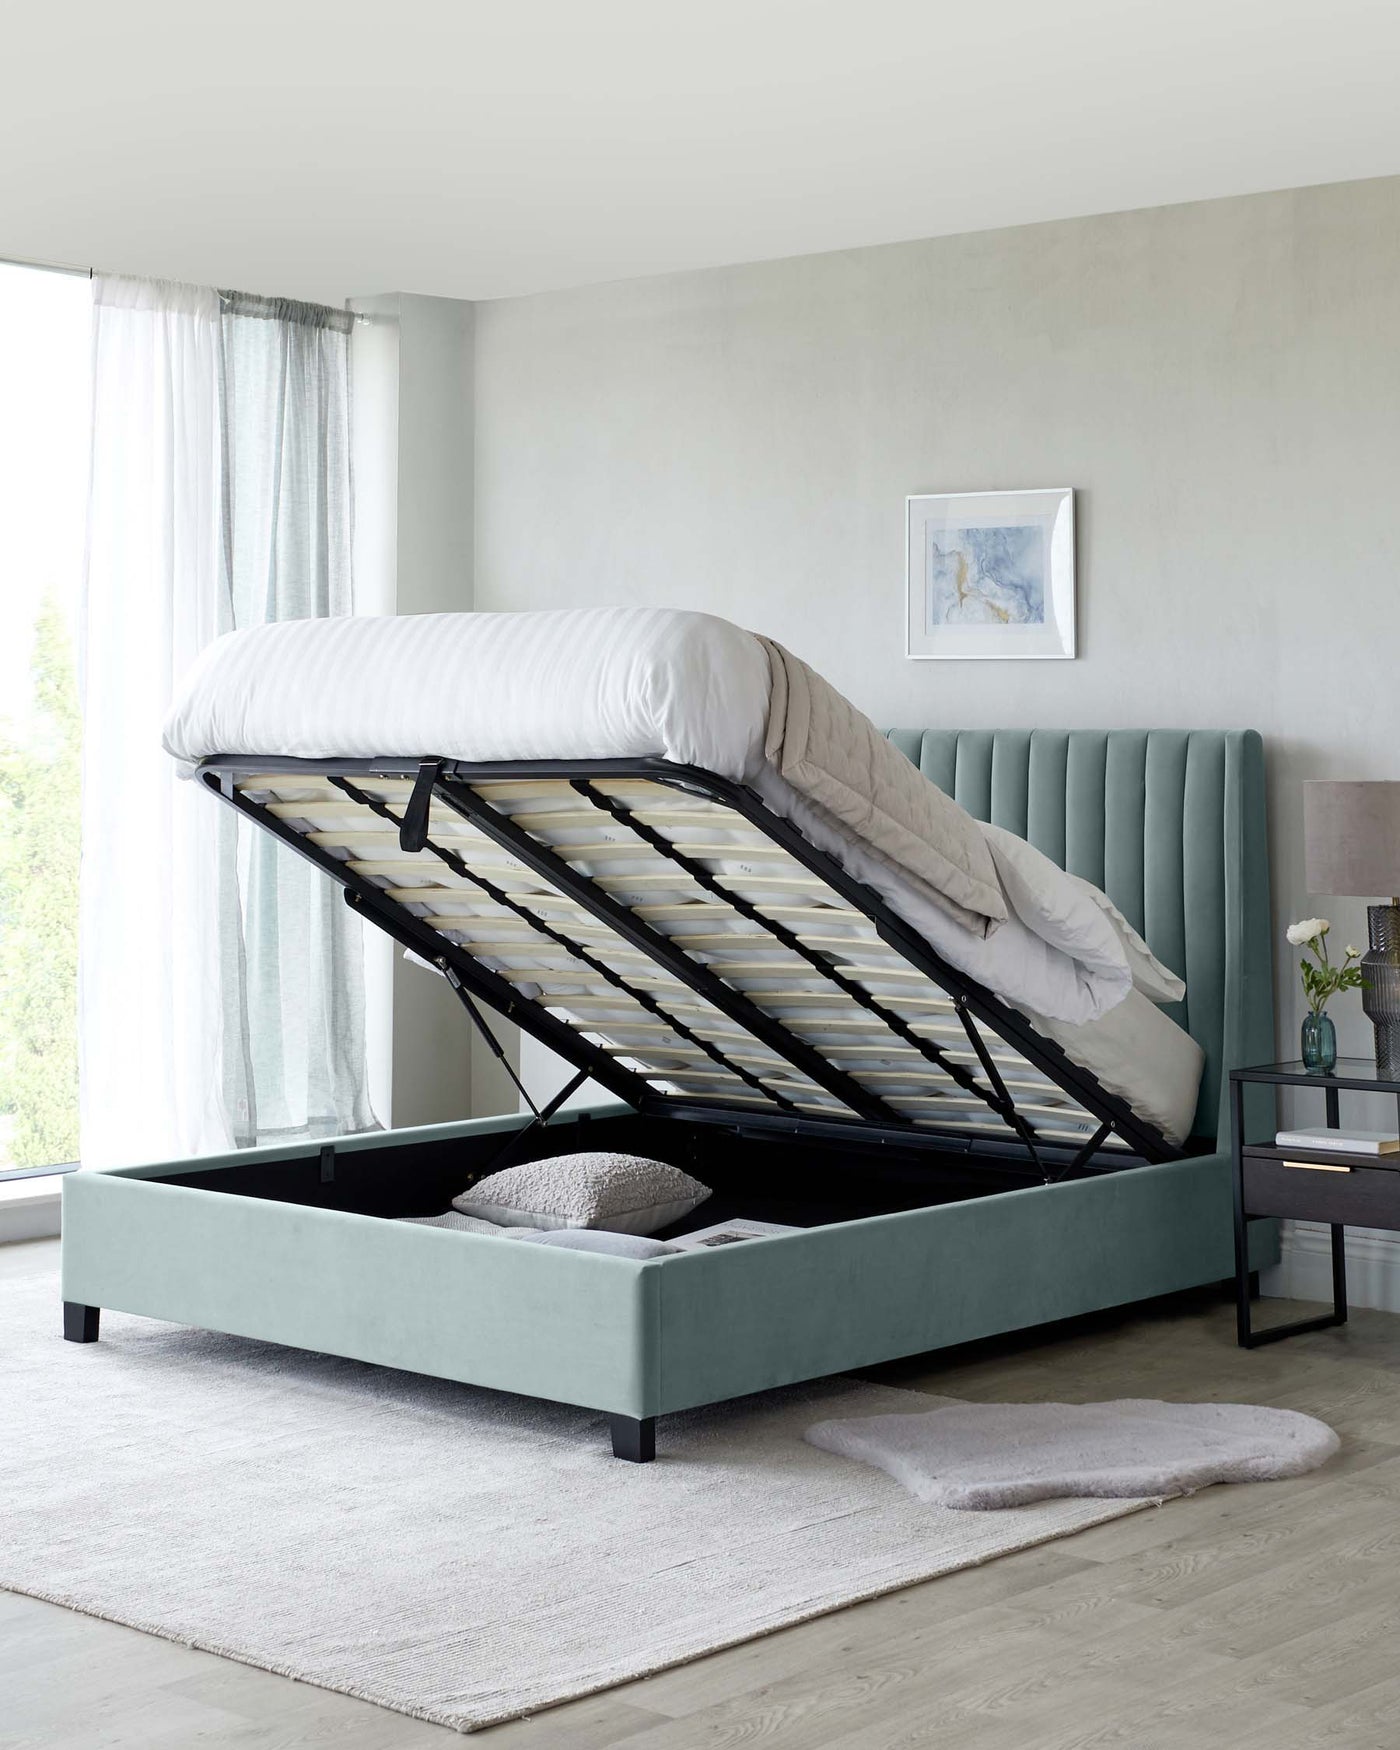 A modern teal upholstered storage bed with the mattress lifted to reveal a spacious storage area beneath. It features a panel-styled headboard and is complemented by a sleek black and glass bedside table.